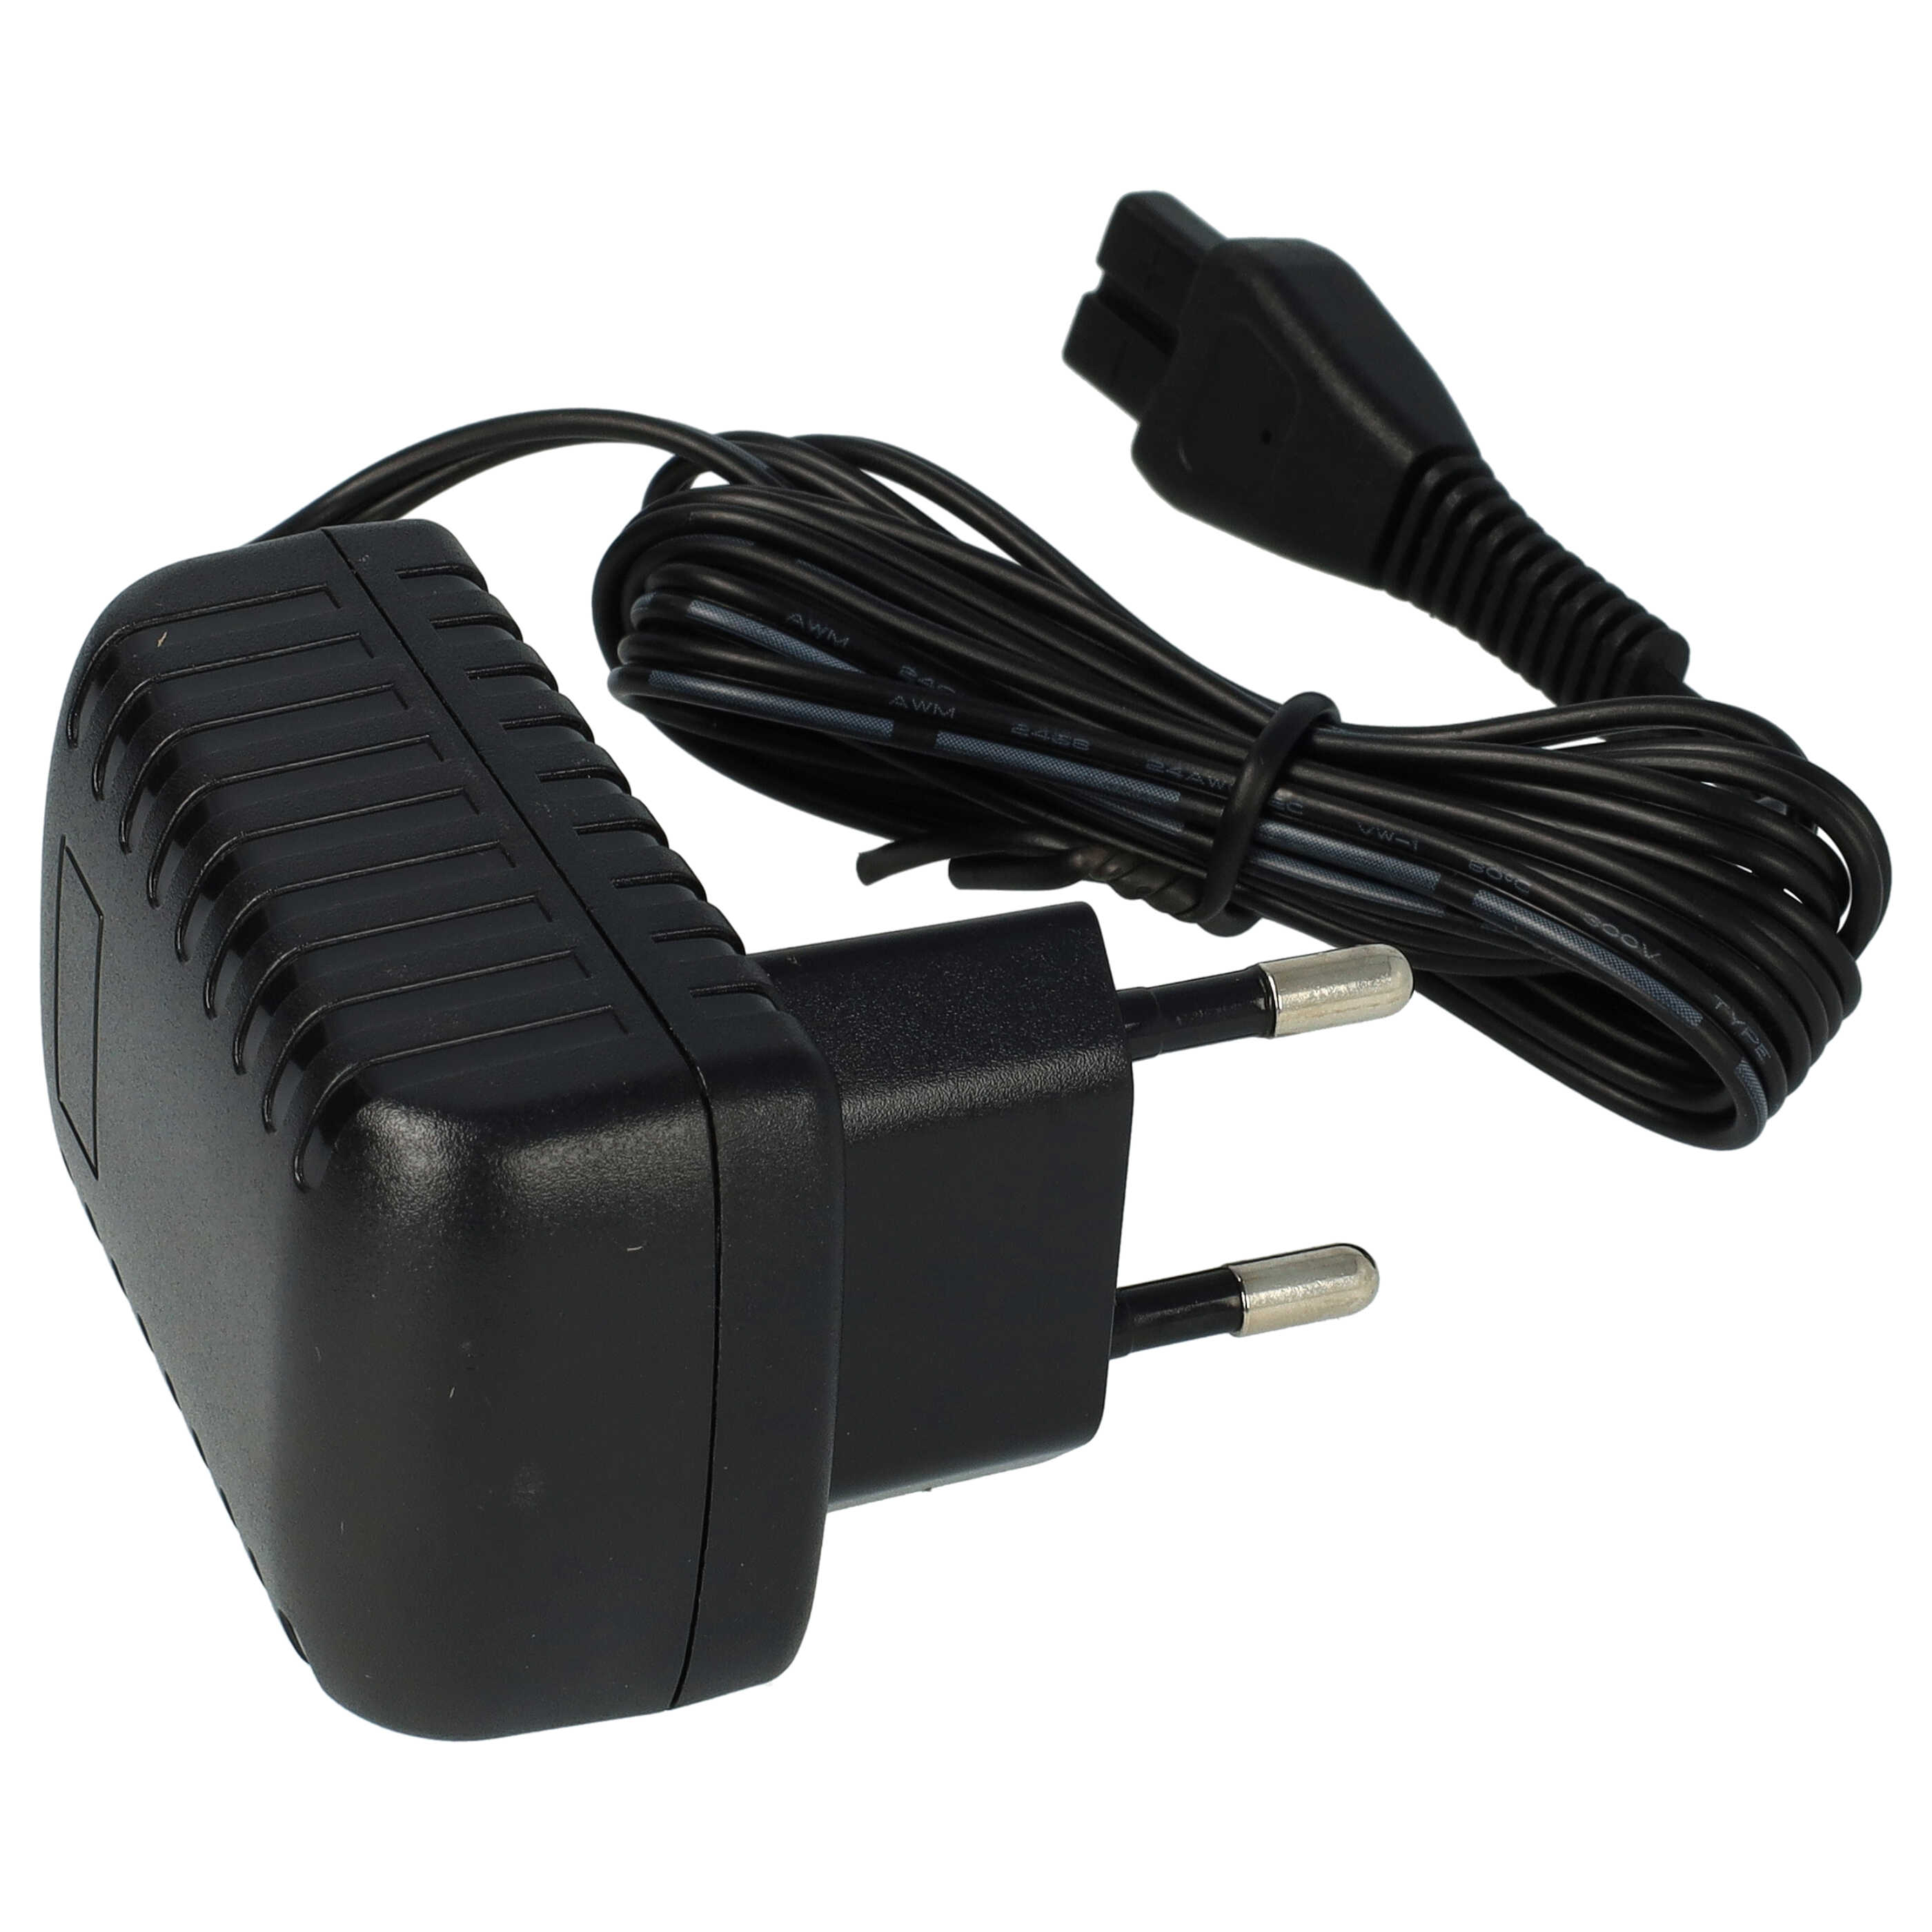 Mains Adapter / Charger replaces Kärcher 4054278294698 for Kärcher Cleaner, Cleaning Device - 6.1 cm